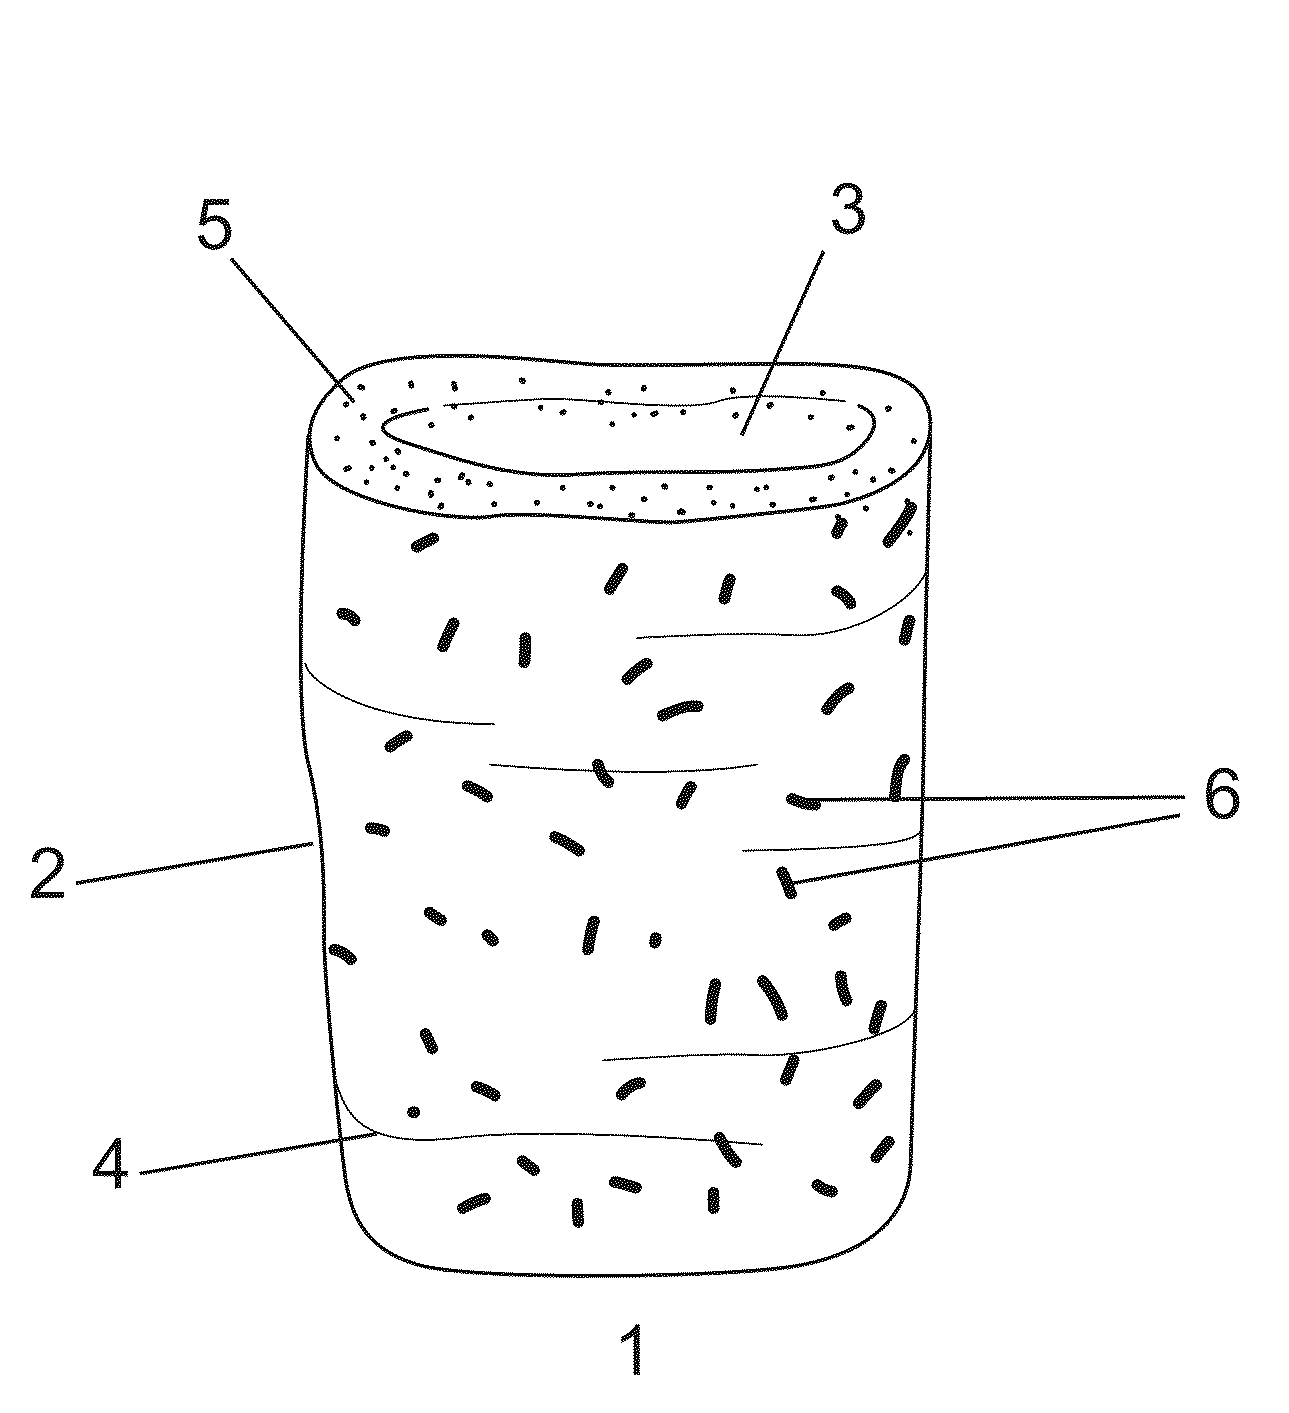 Edible, biodegradable food and beverage container